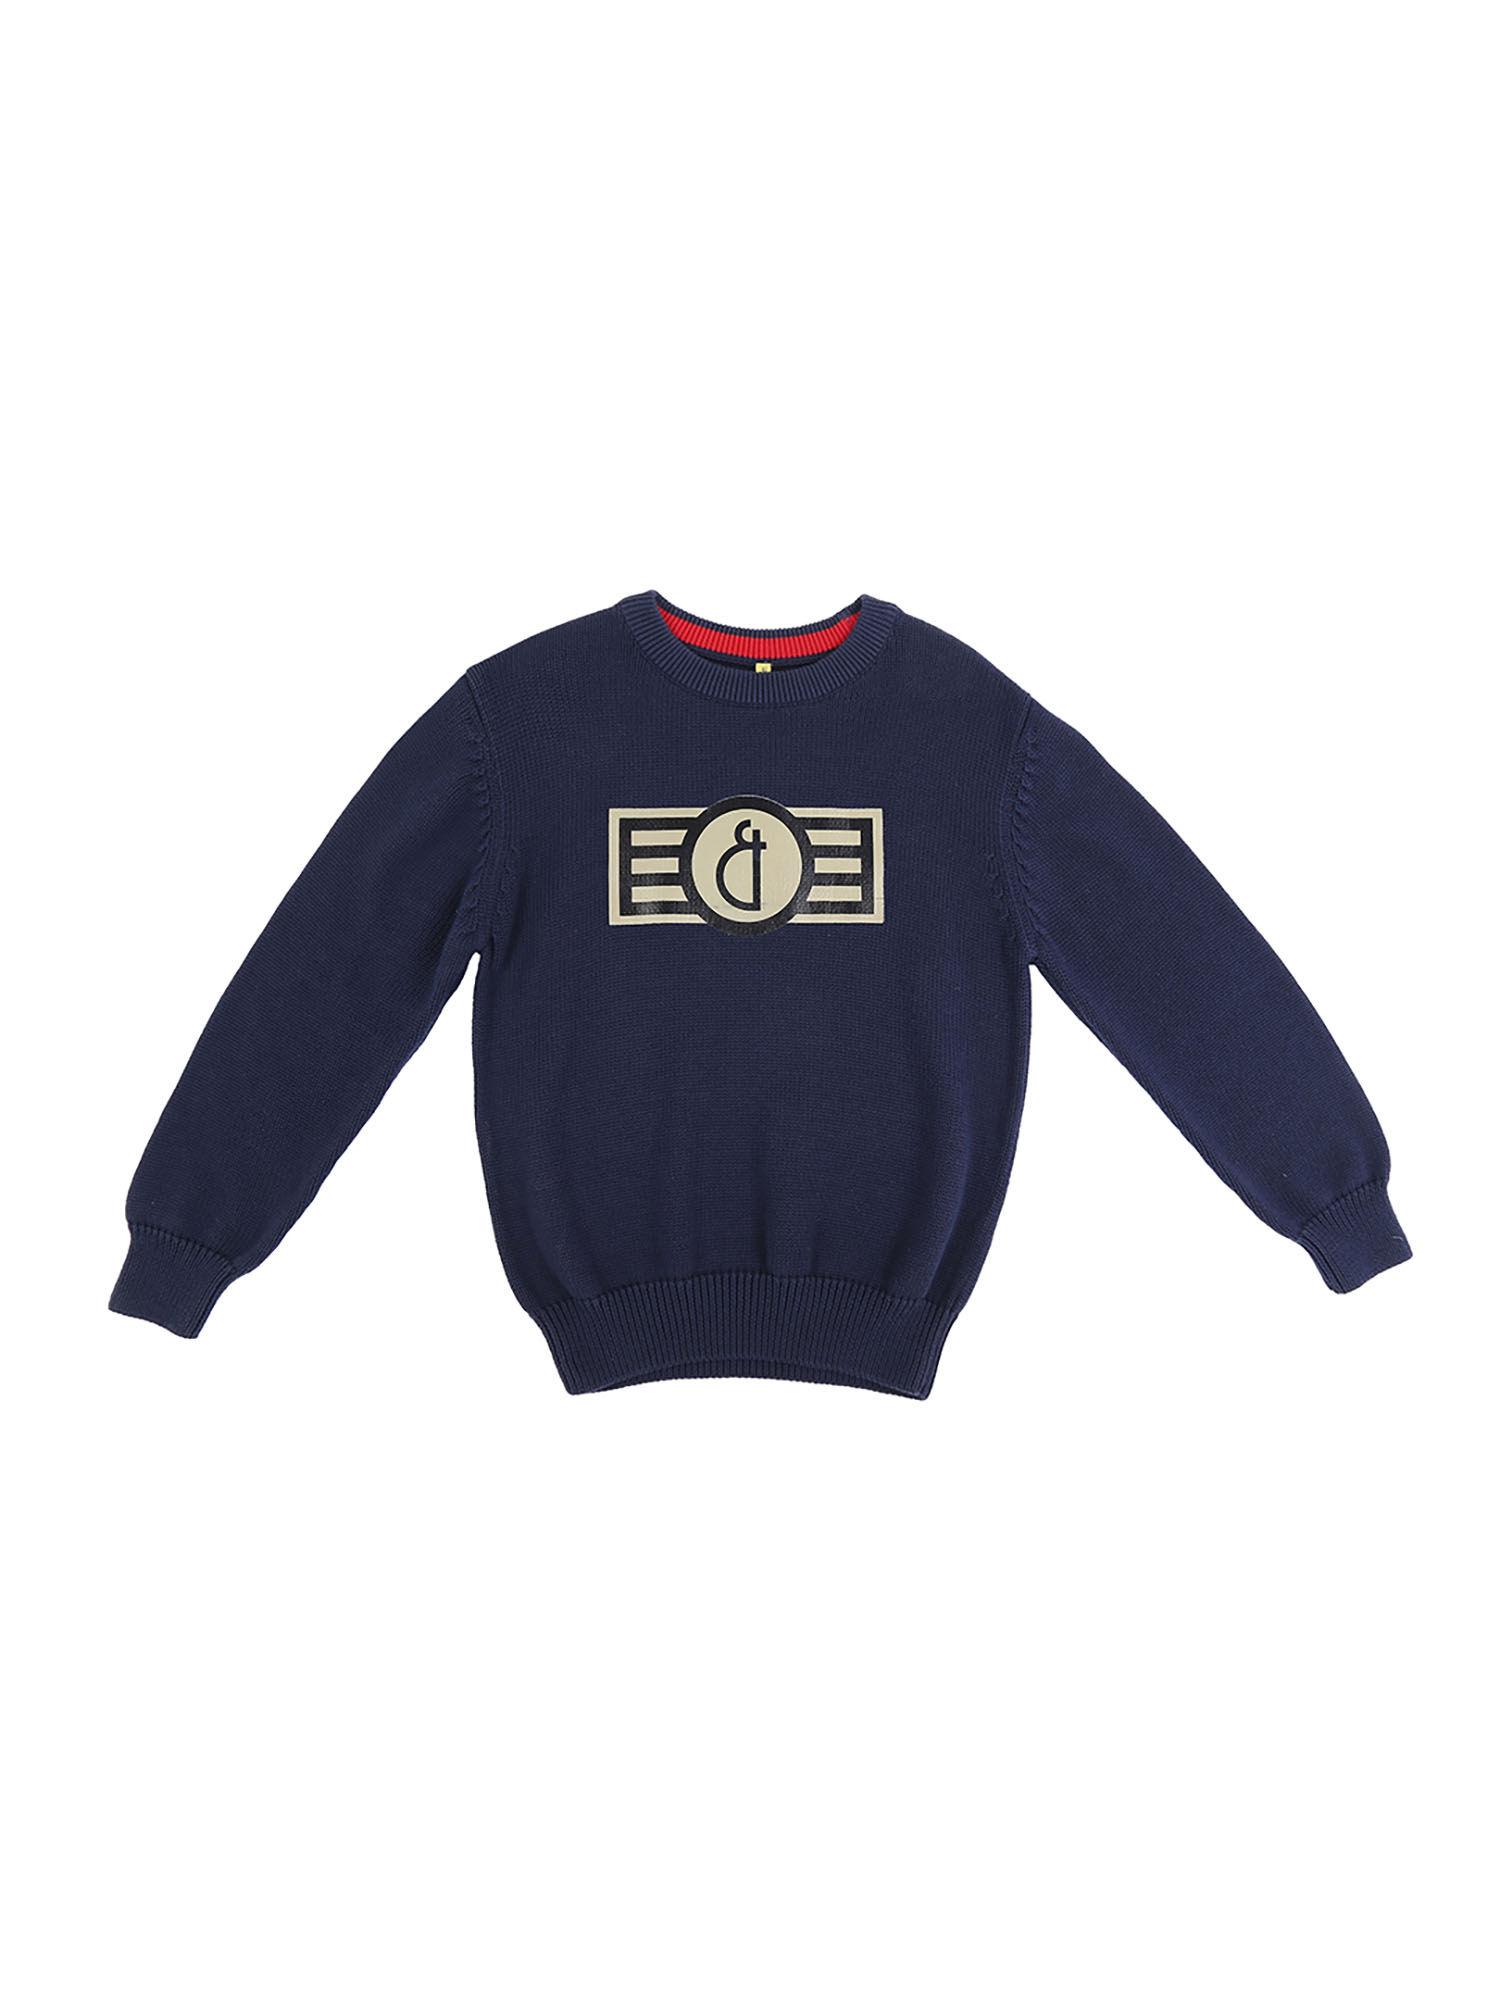 navy-blue-color-solid-plain-sweater